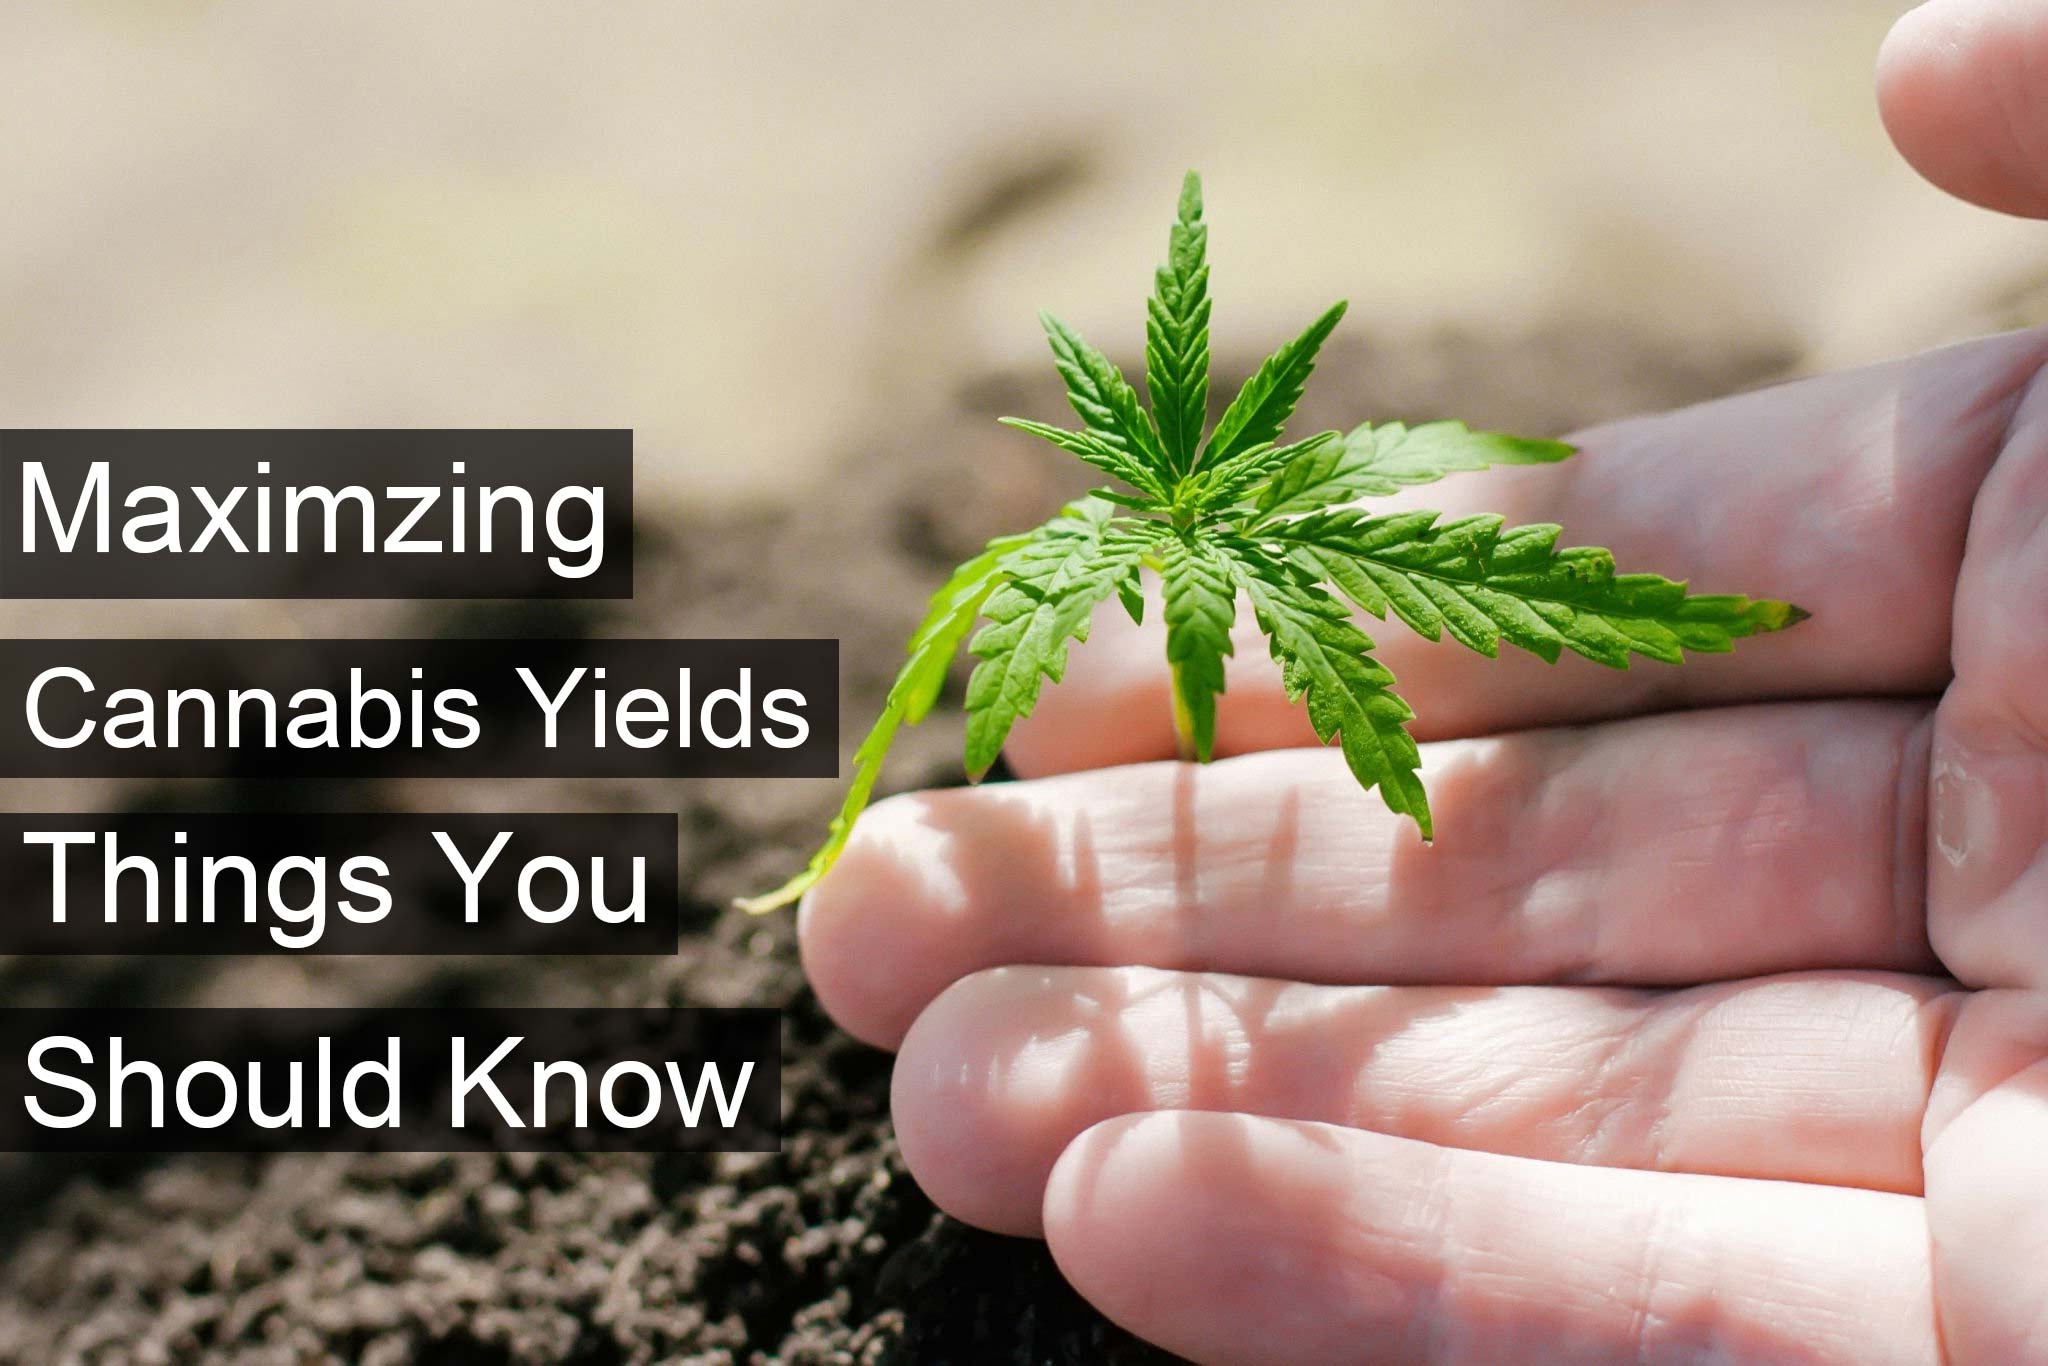 Maximizing Cannabis Yields: Things You Should Know